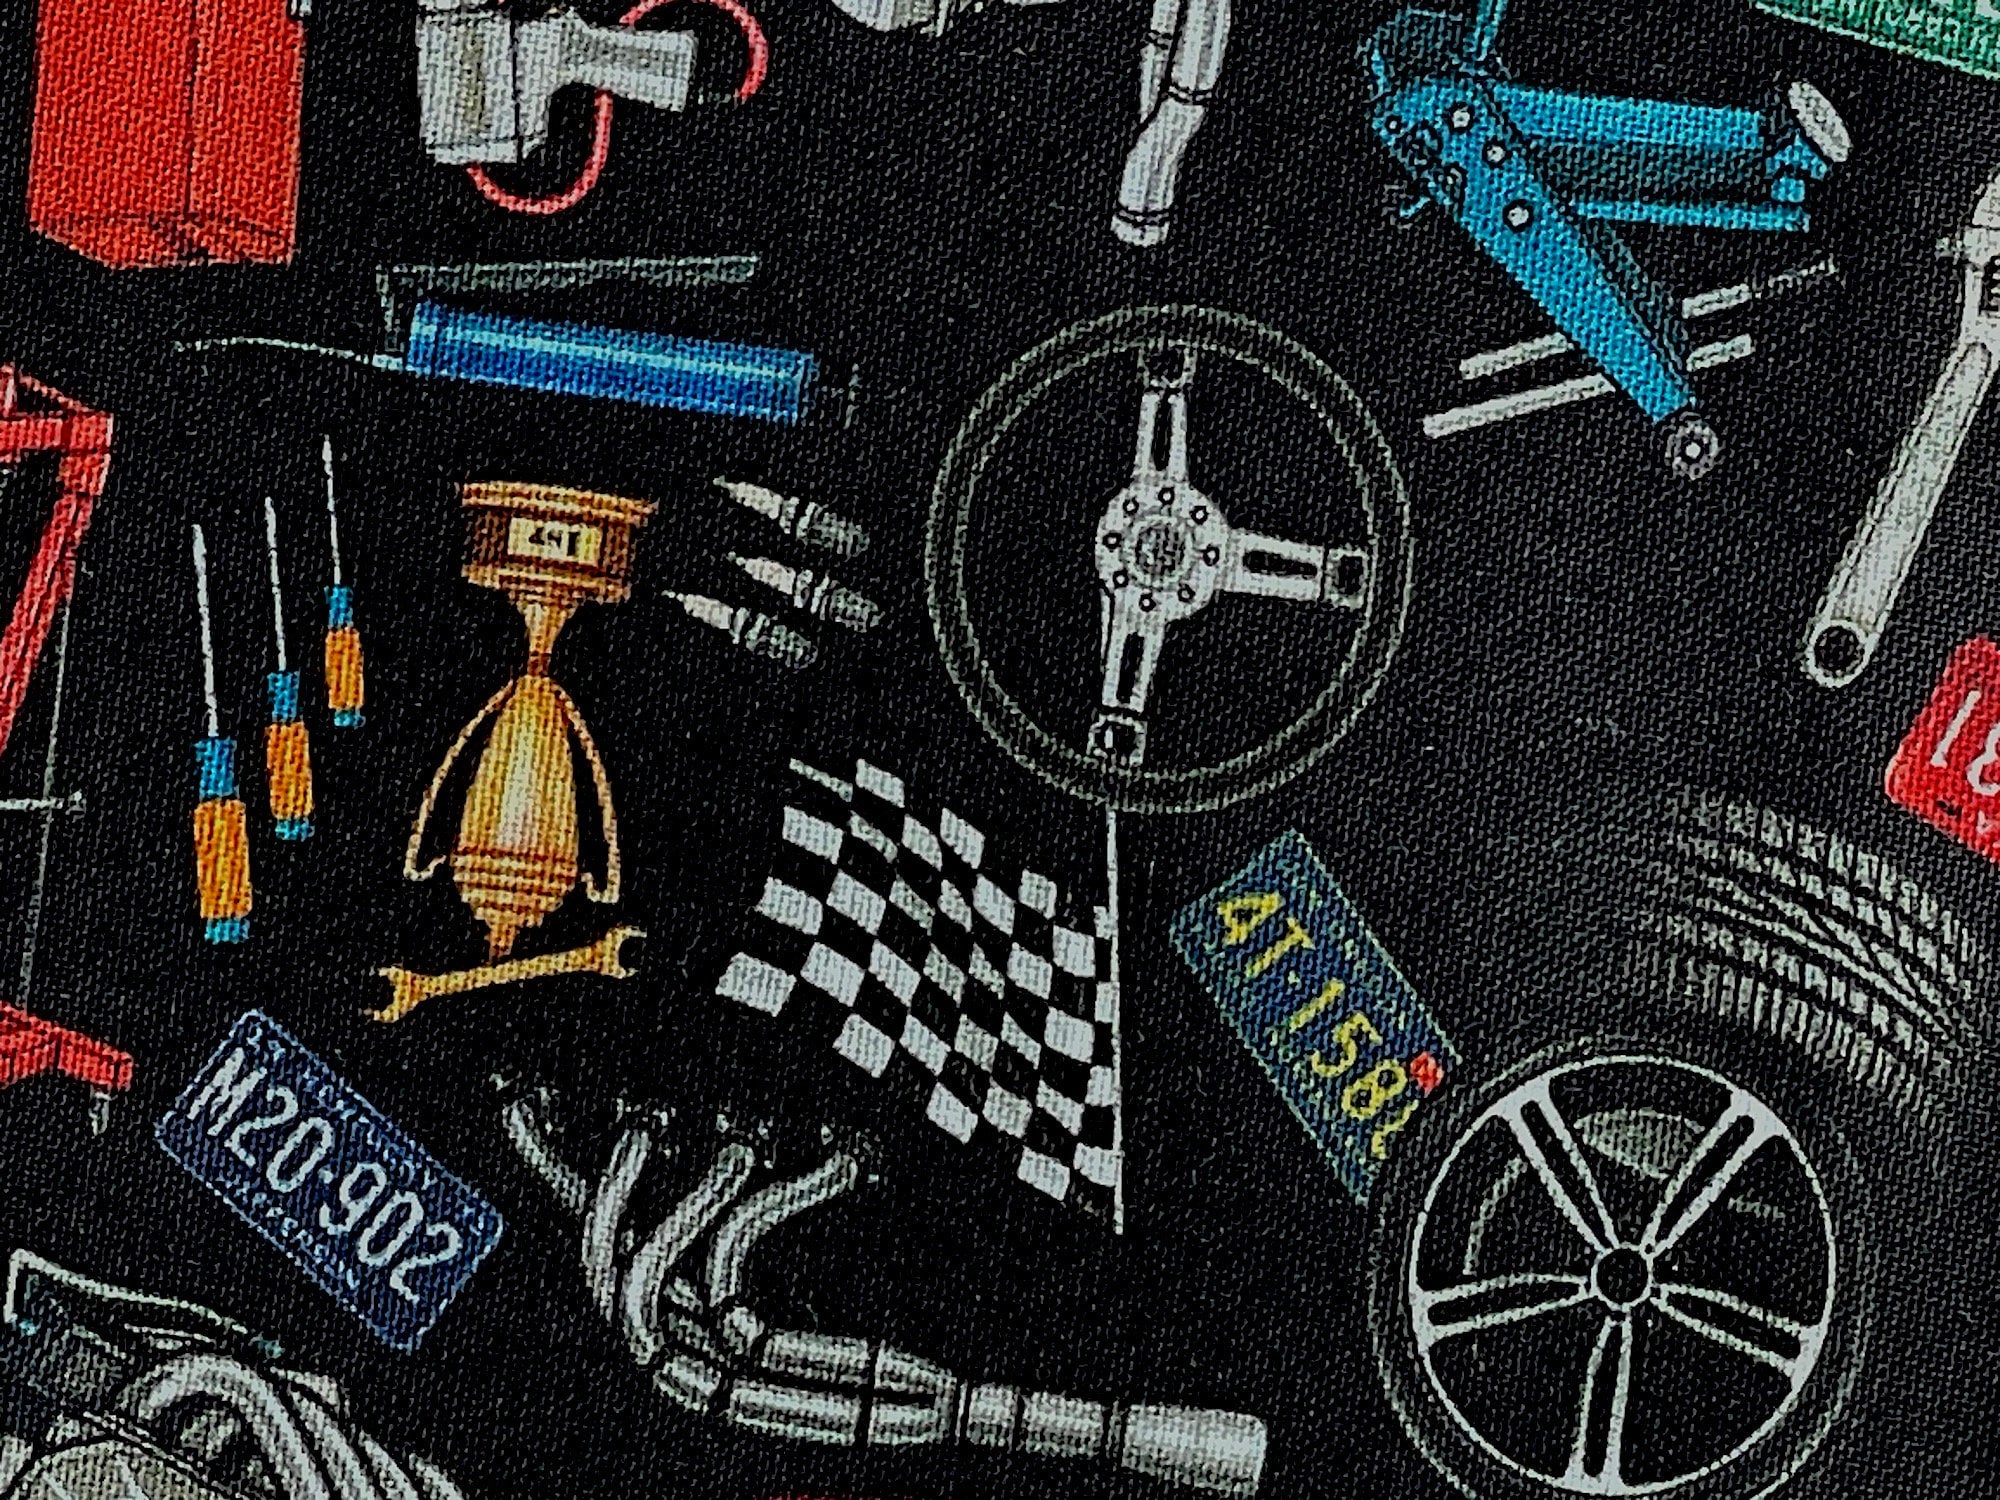 Close up of steering wheel, tires, license plates, screwdriver and more.